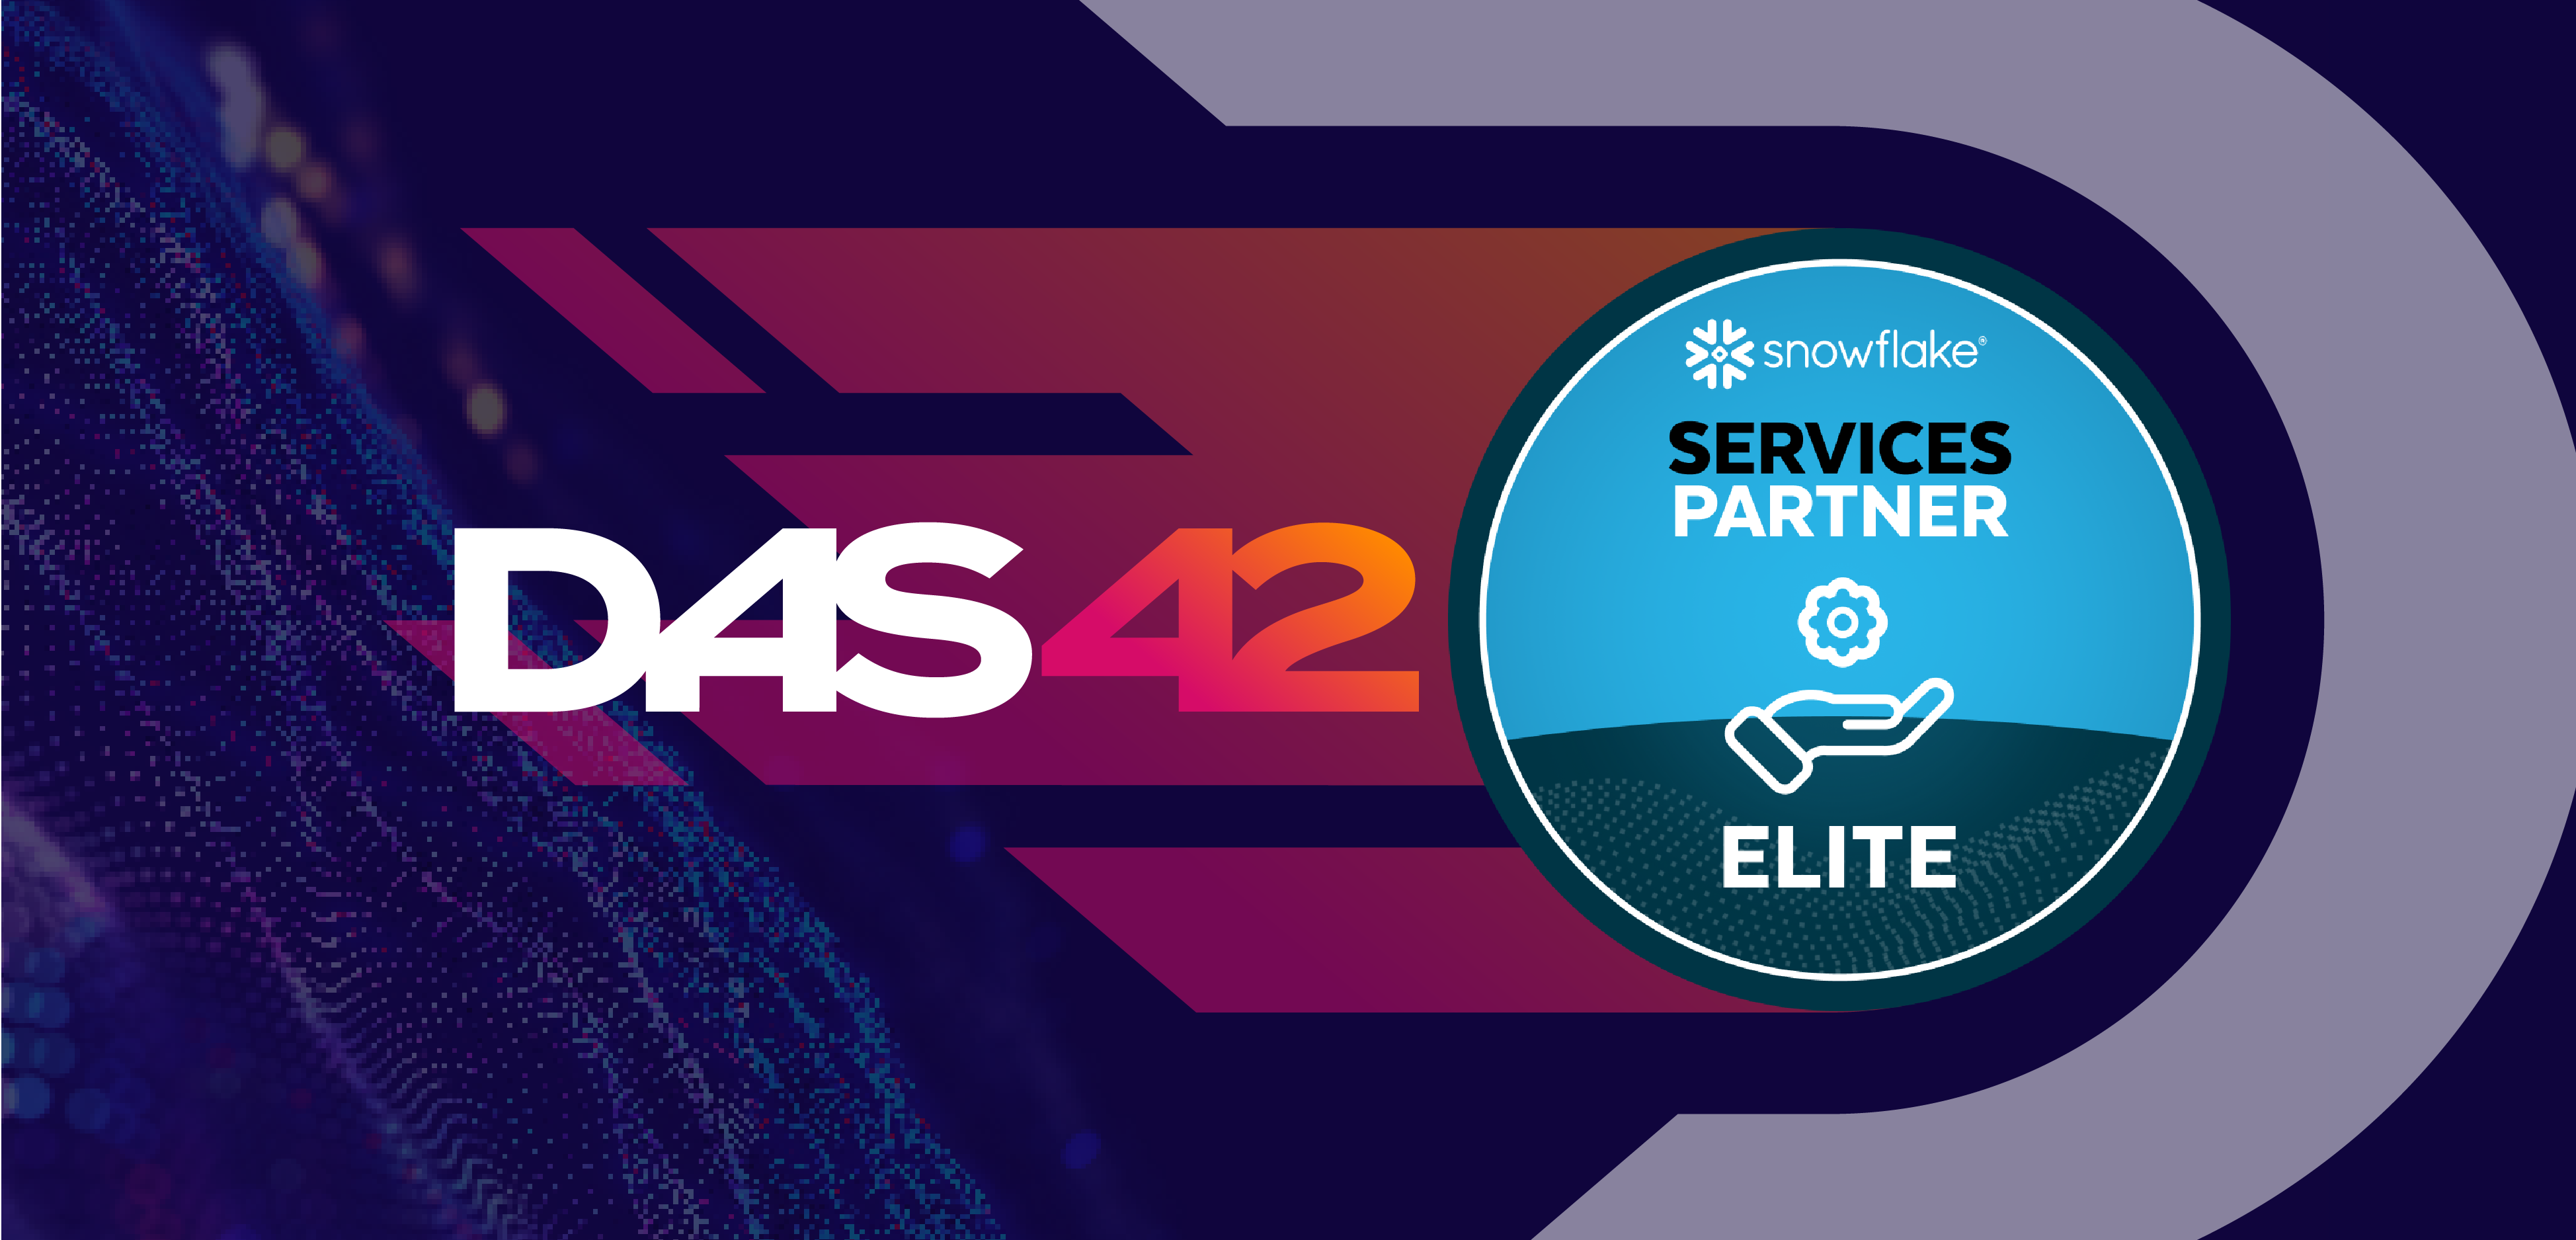 Featured image for “DAS42 Achieves Elite Tier Partner Status With Snowflake for Fourth Consecutive Year”